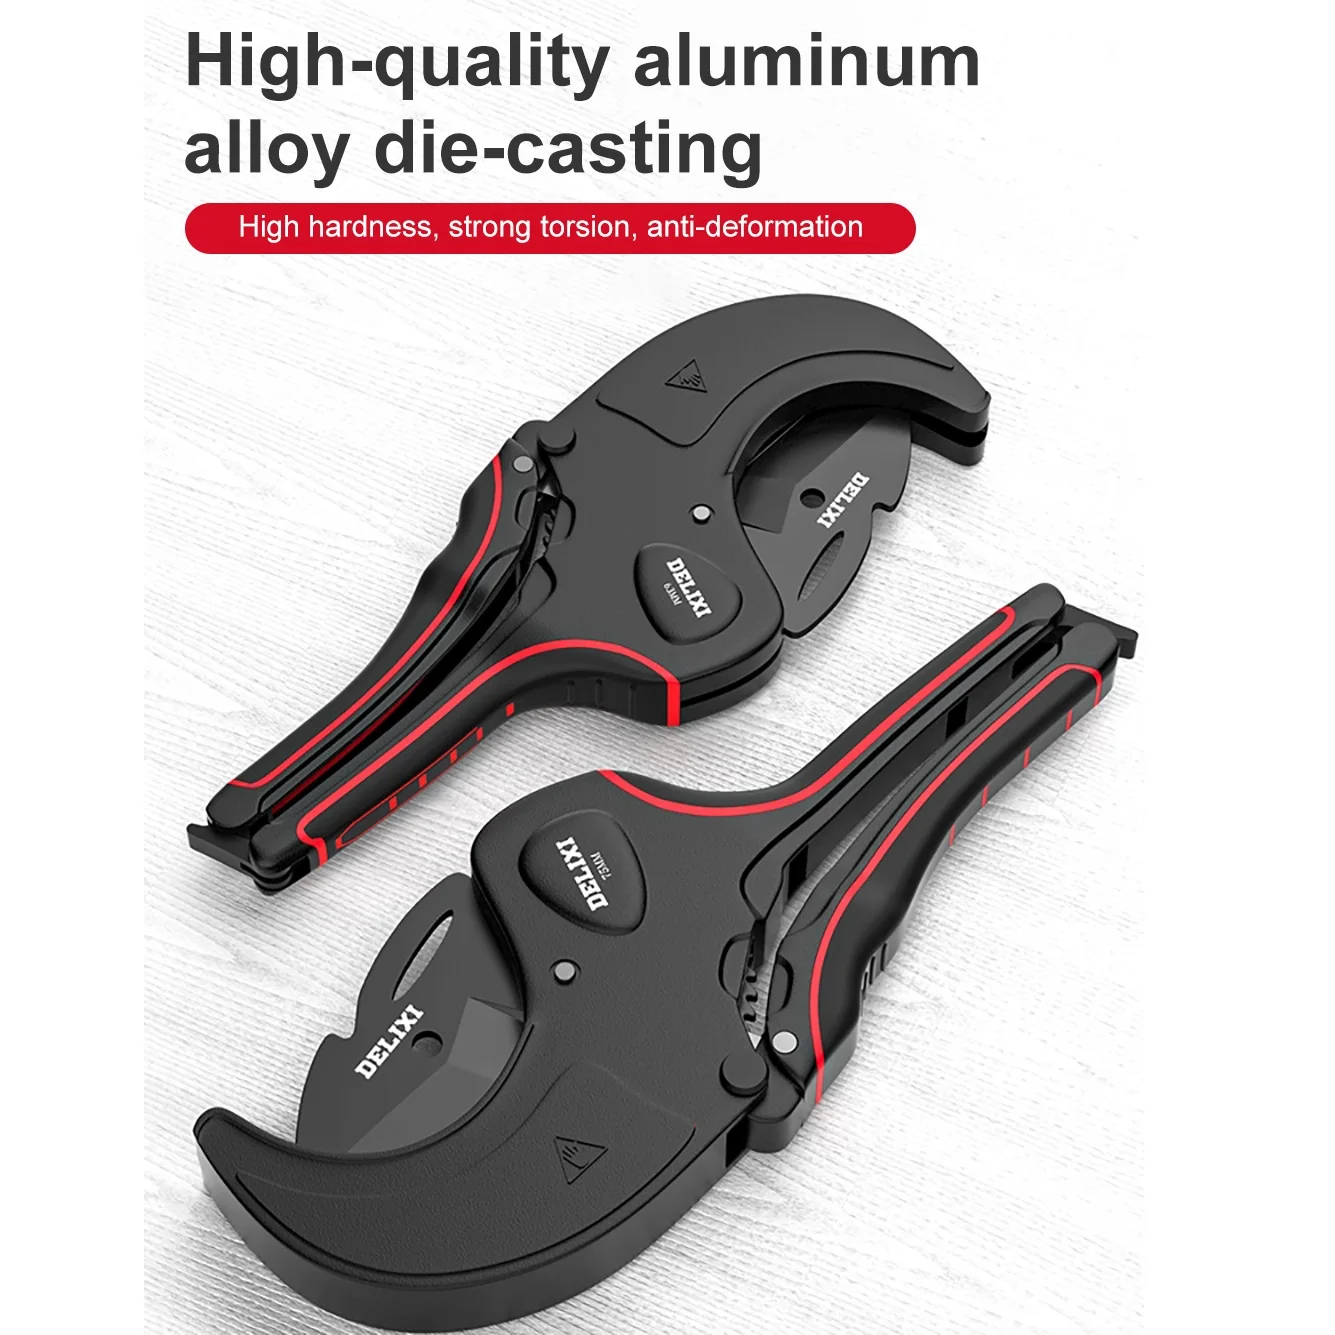 DELIXI Pipe Cutter For Plumber 32 42 63 75mm Pipe Scissors SK5 Material PVC Pipe Plastic Pipe Cutter Hand Tool Household 2021 6